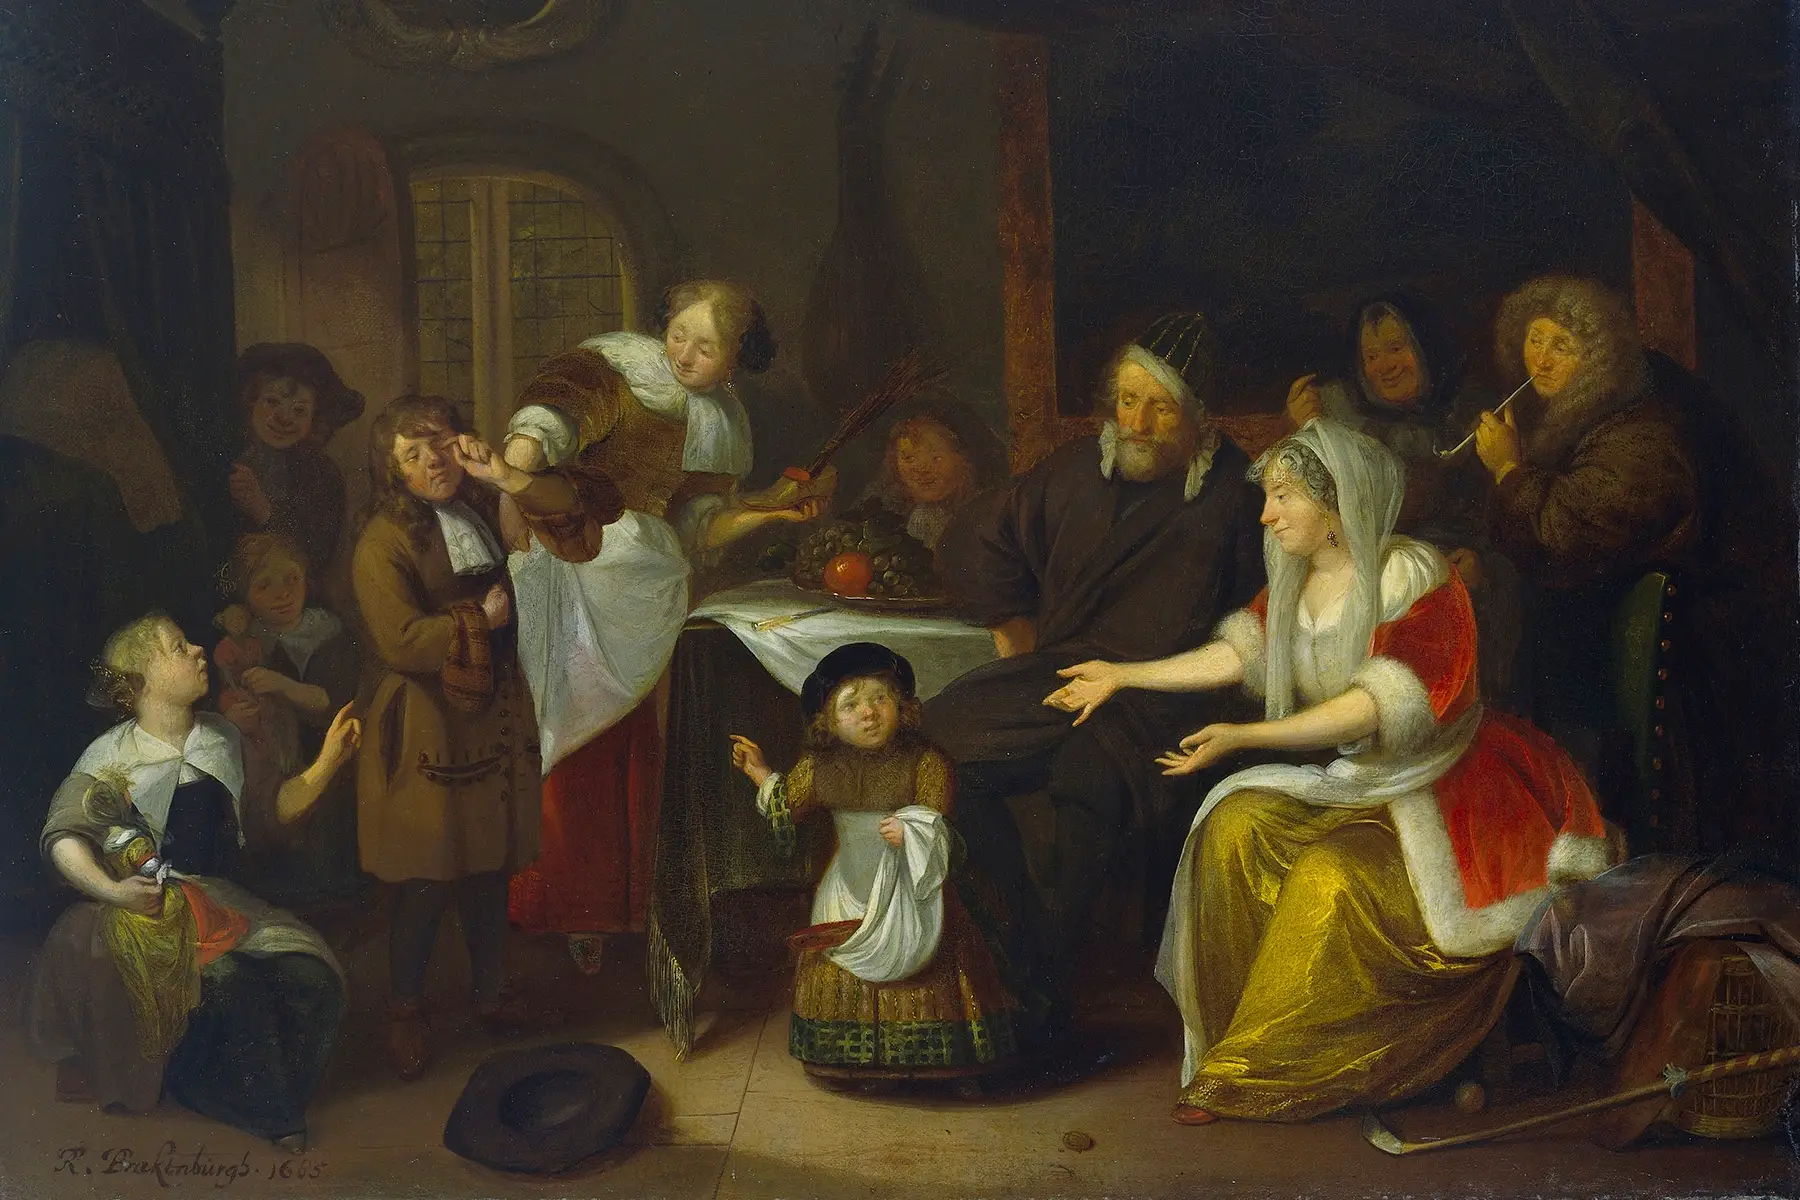 Het Sint Nicolaasfeest by Richard Brakenburg (painted in 1685) depicts a family celebrating. One of the boys is crying, because he received a rod in his shoe.